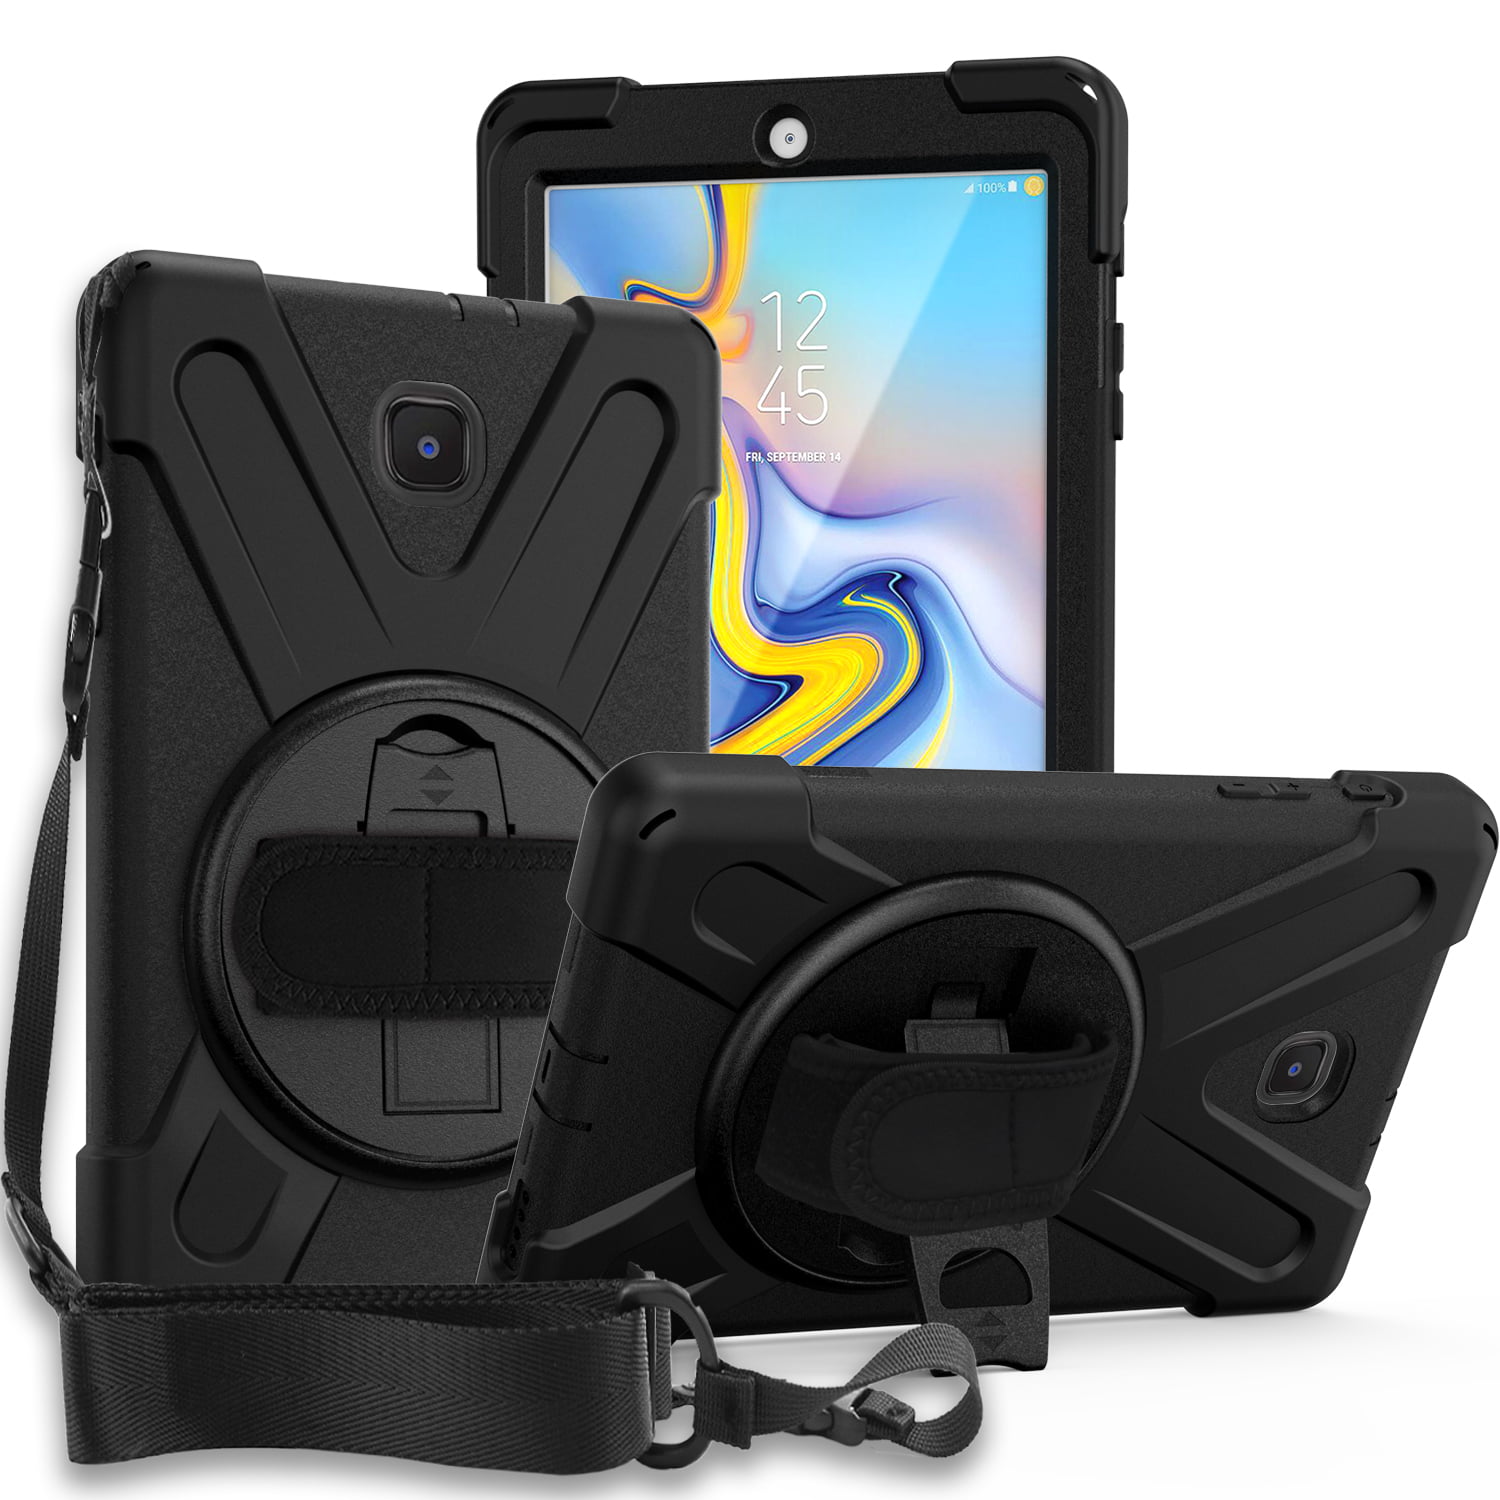 KIQ Galaxy Tab A 8 Inch case with Screen Protector, Tempered Glass Cover, Case with Stand